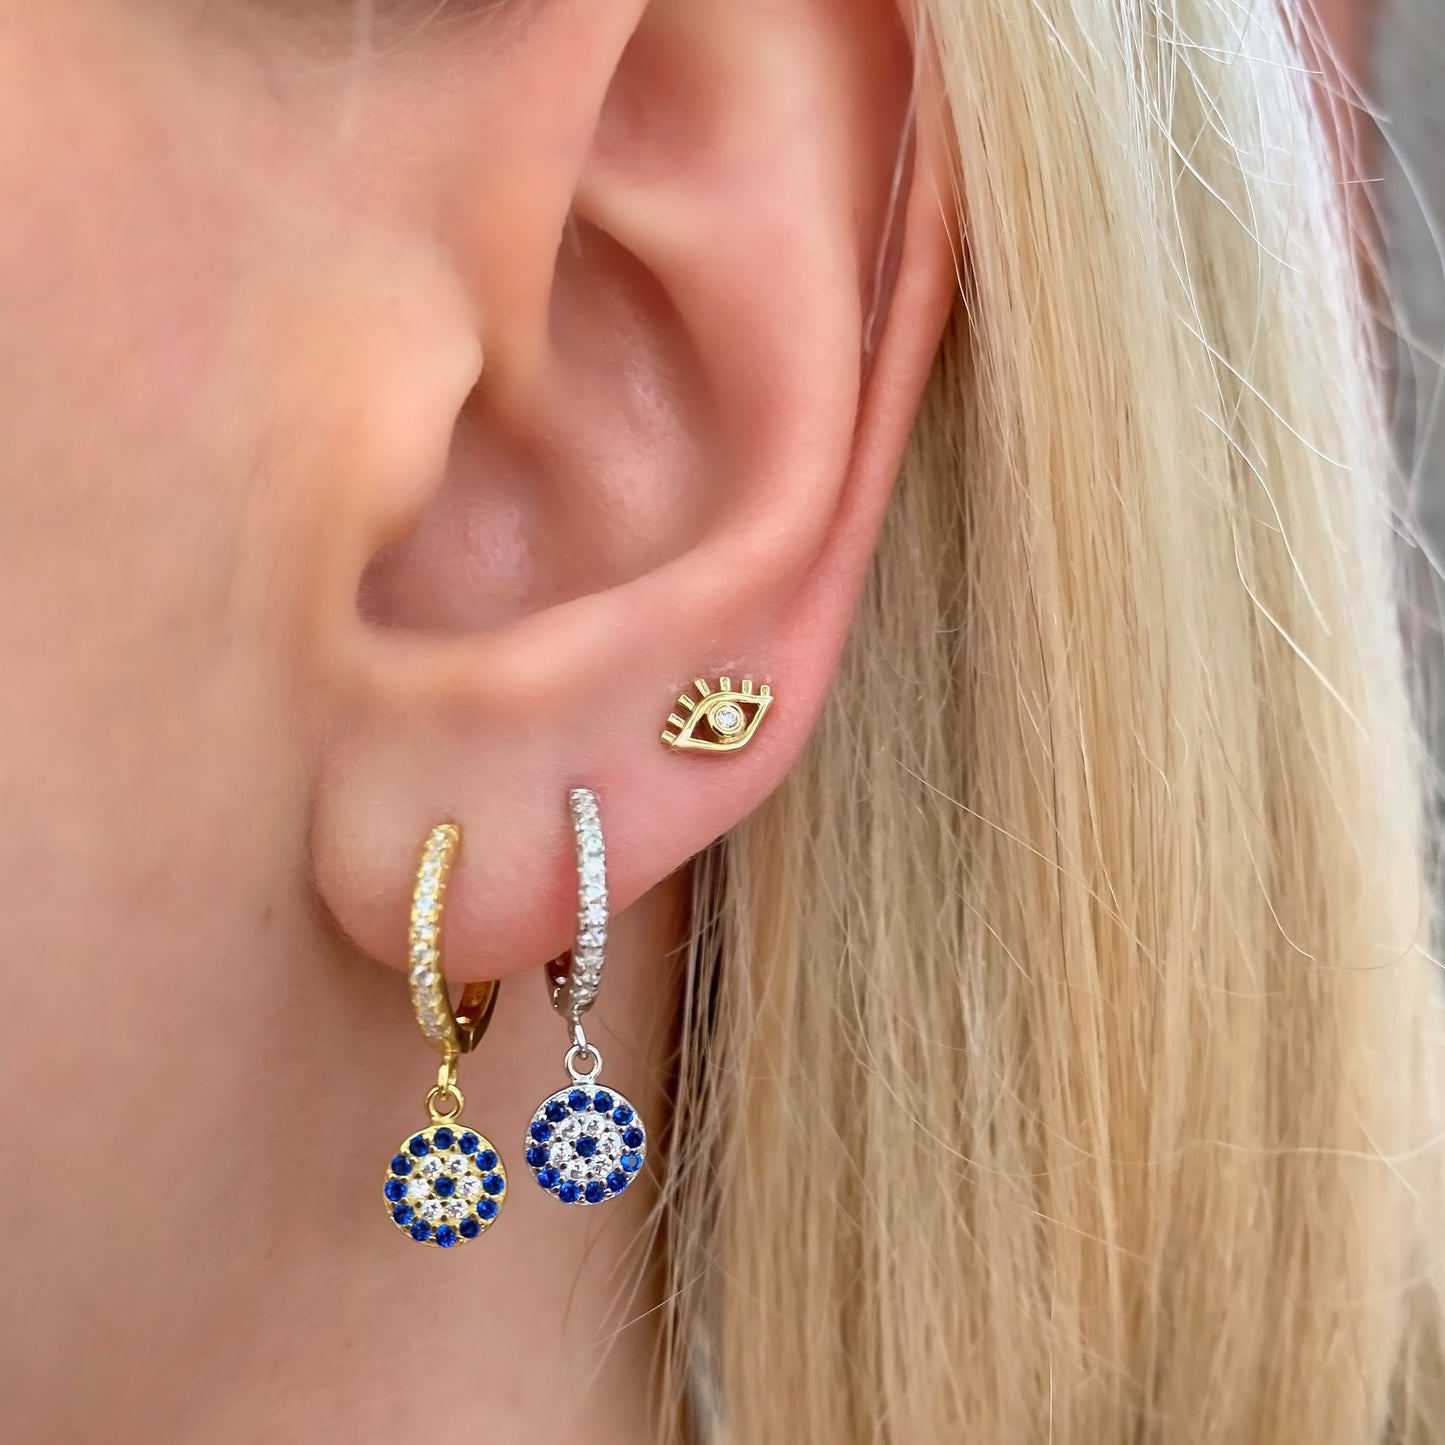 Wearing the gold and silver evil eye charm earrings from Alexandra Marks Jewelry